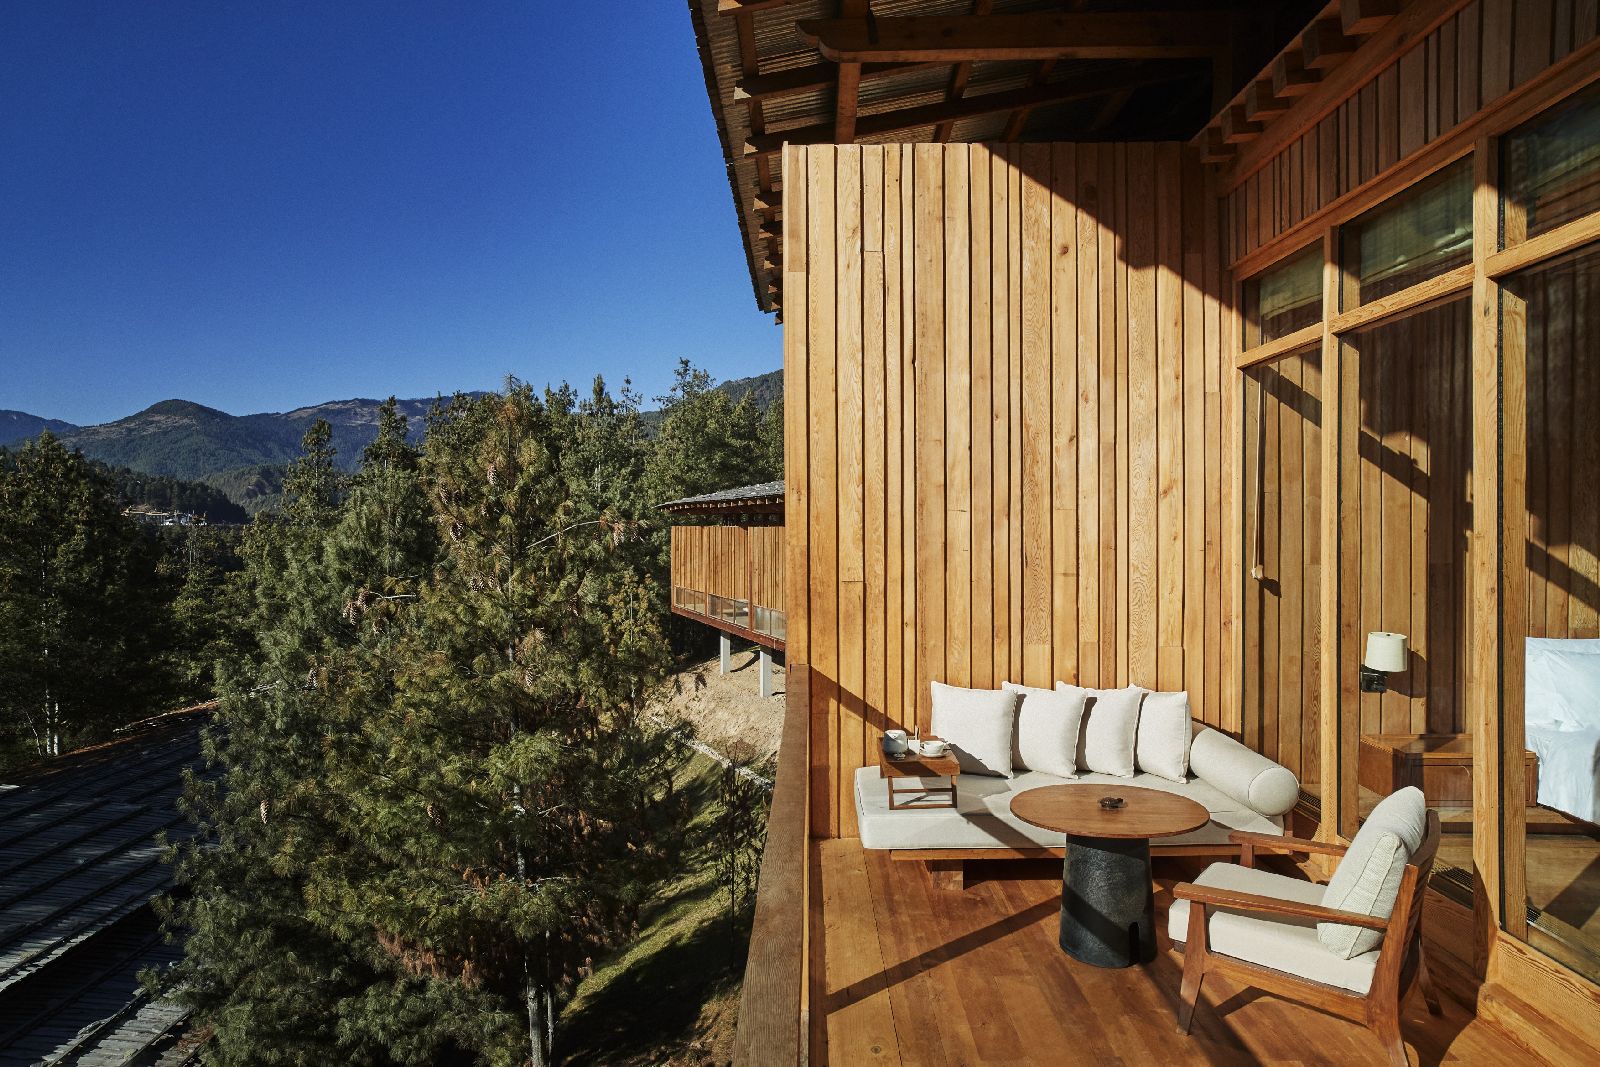 Forest views from a suite terrace at Six Senses Bumthang in Bhutan